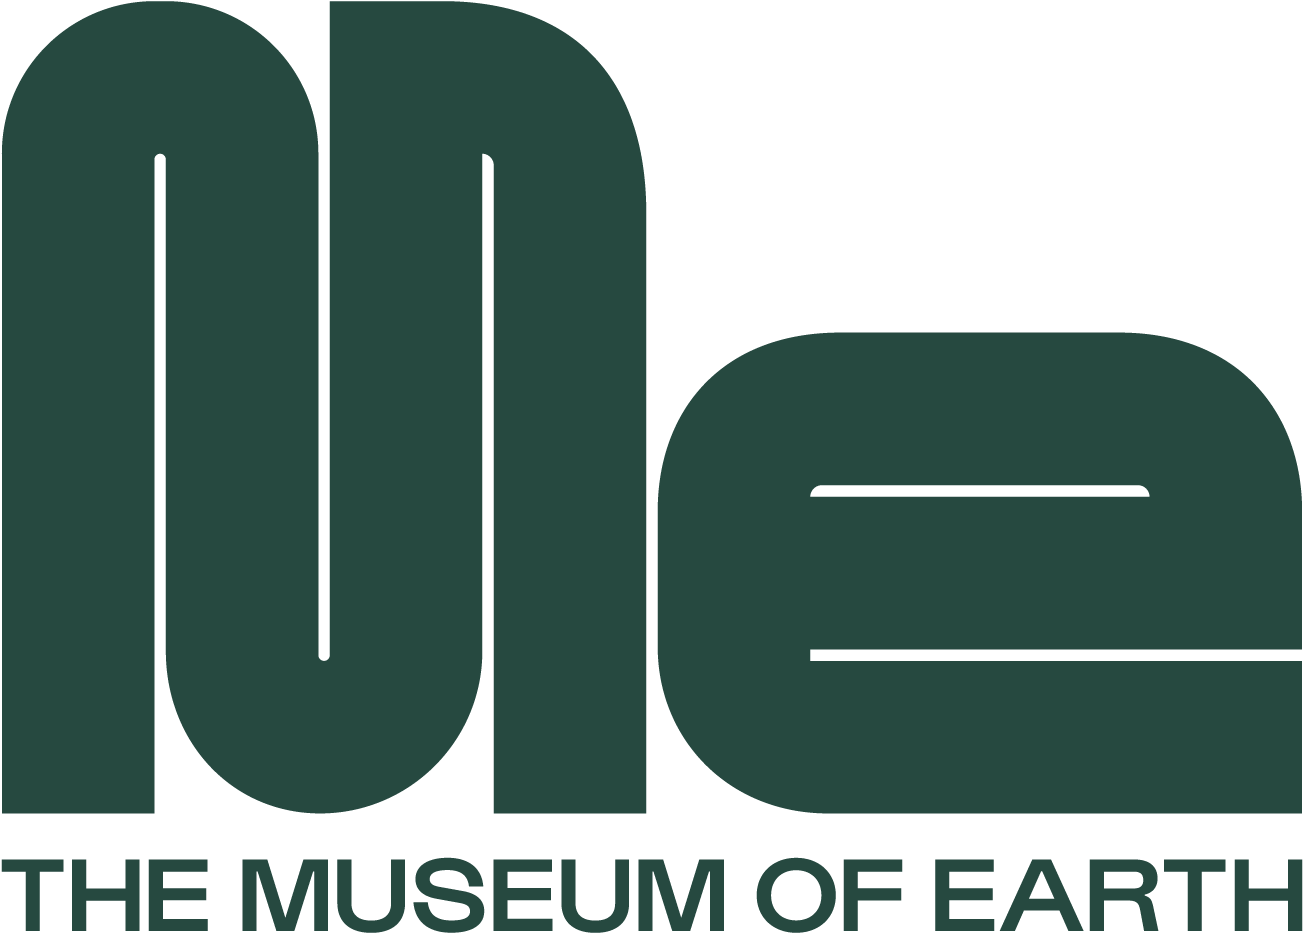 THE MUSEUM OF EARTH